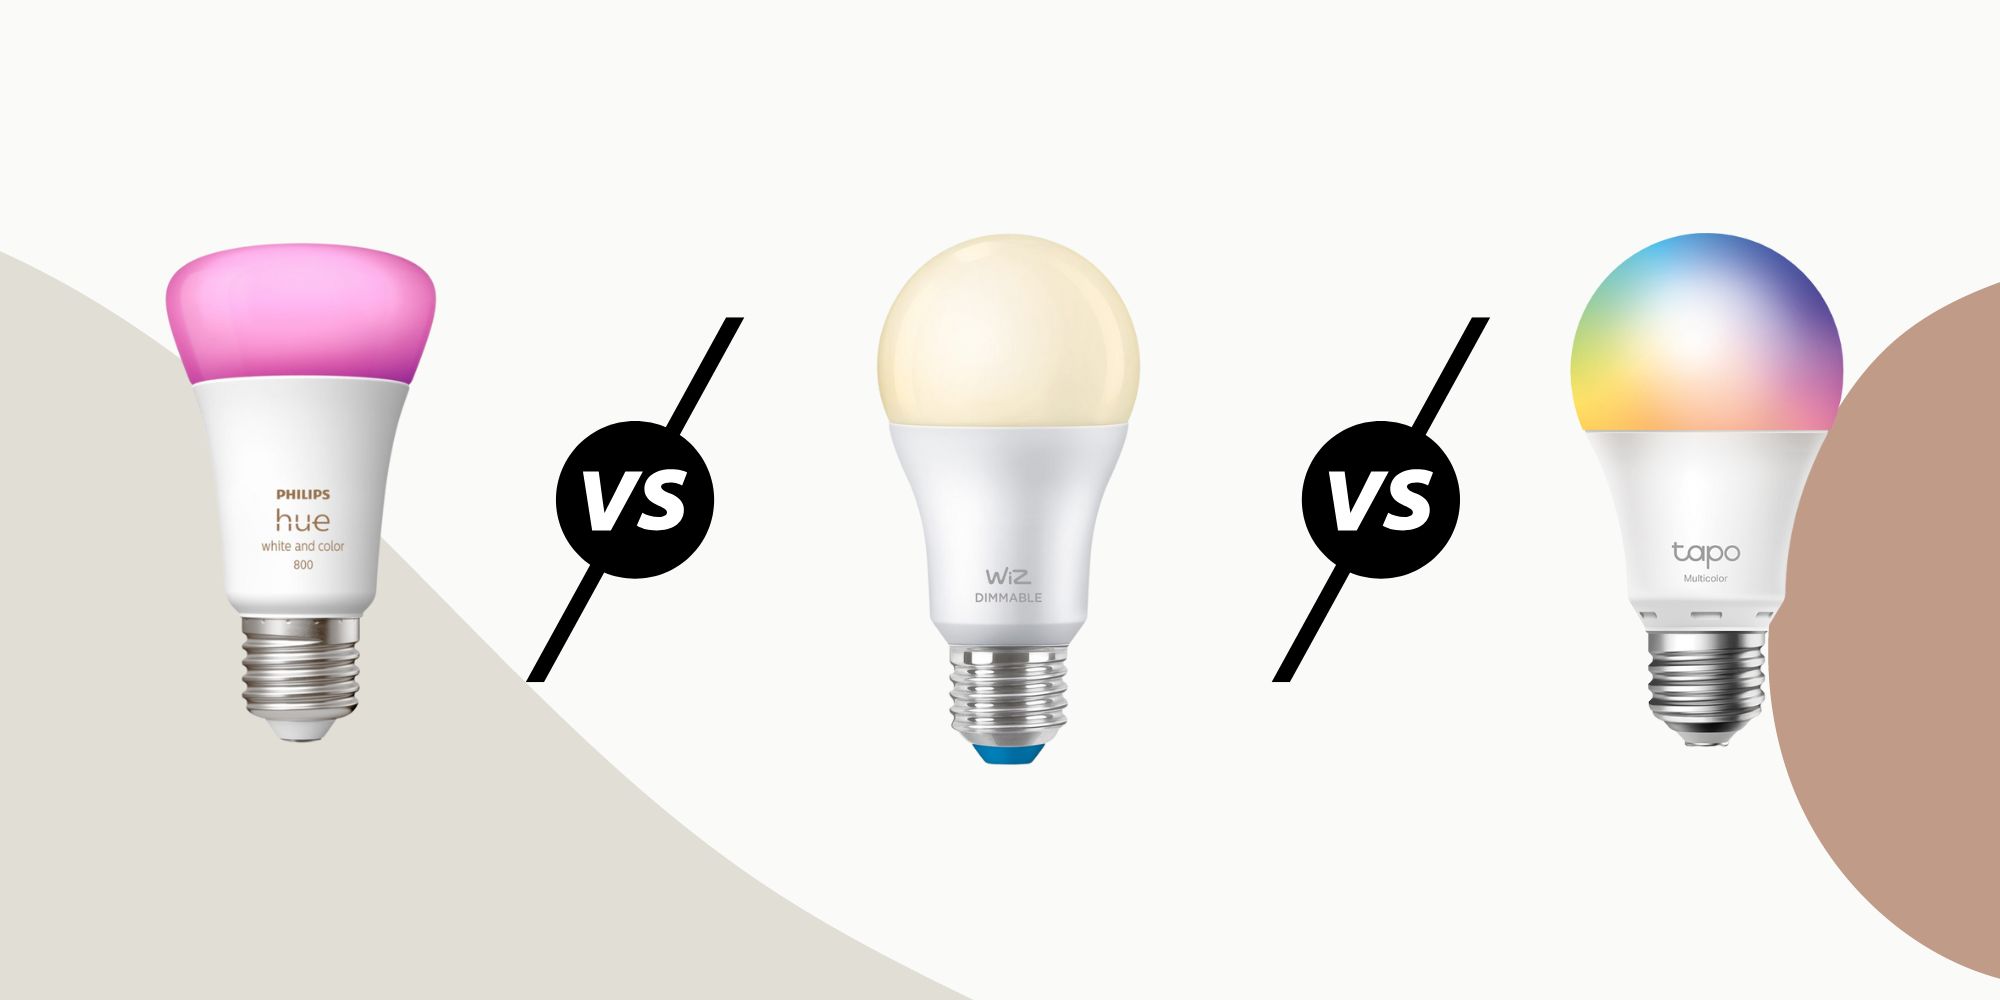 Philips Hue vs WiZ vs TP-Link Tapo Compared – The best smart home lighting options